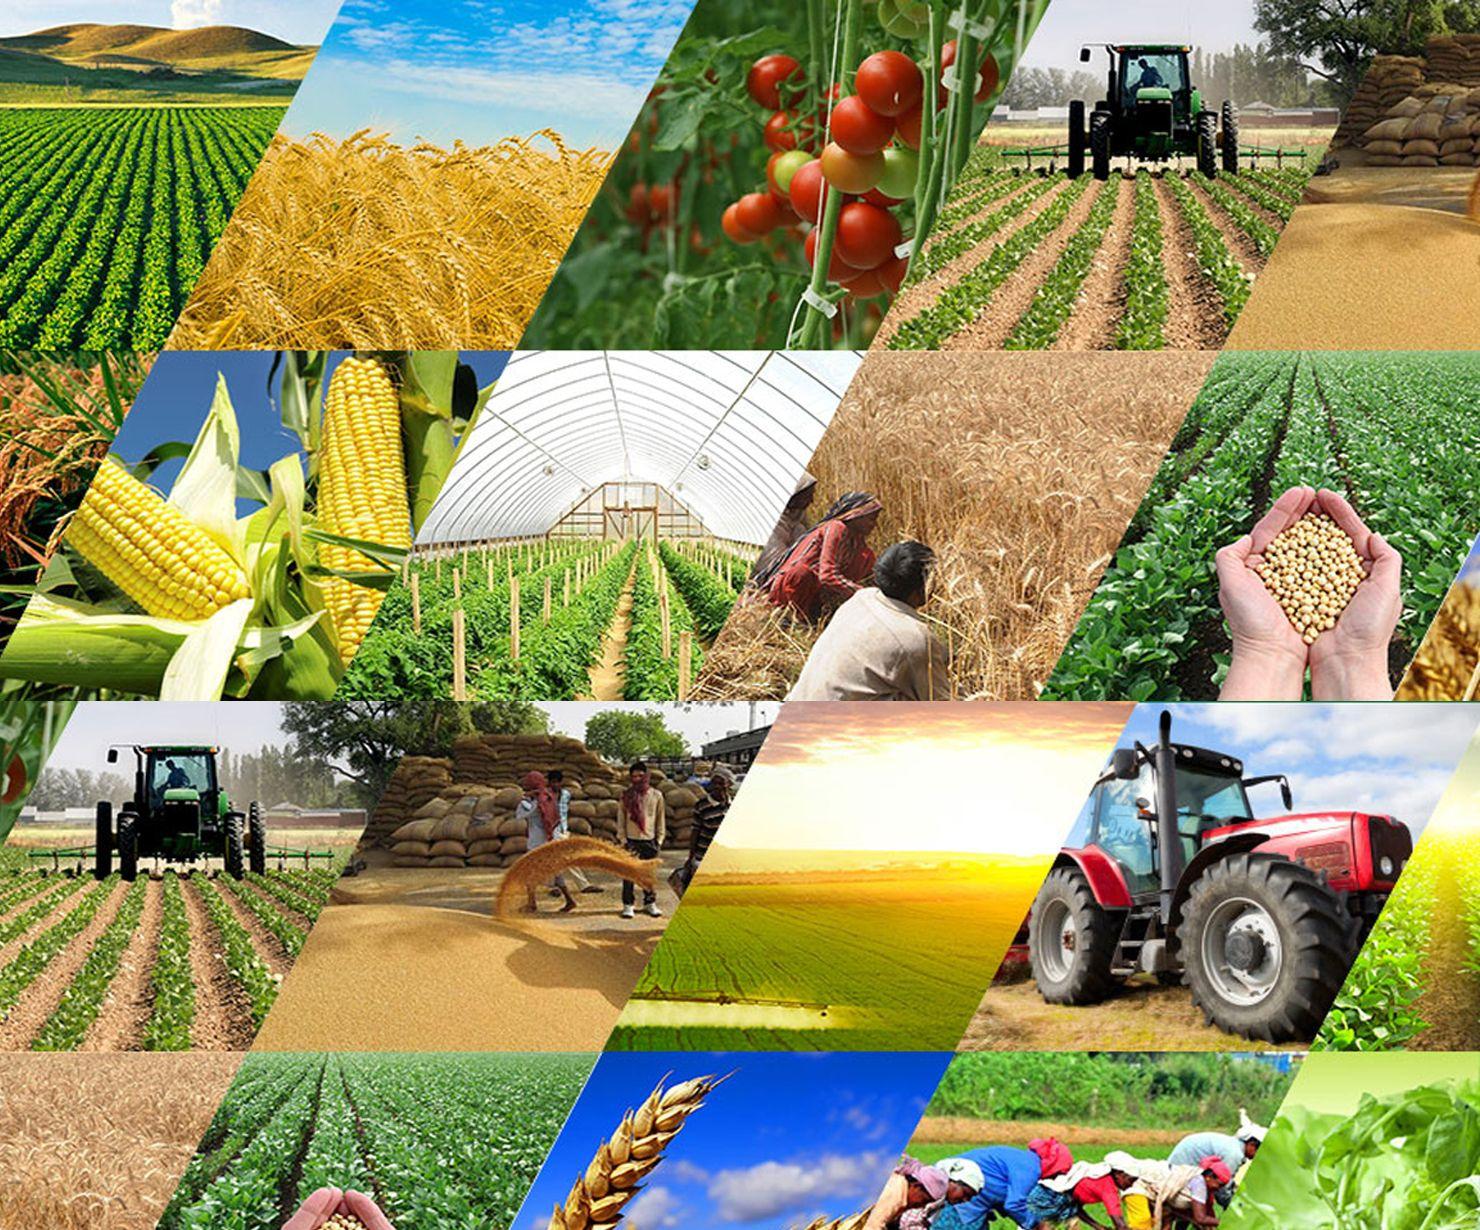 Shavkat Mirziyoyev: exports have not exceeded $2bn in agriculture and food industry